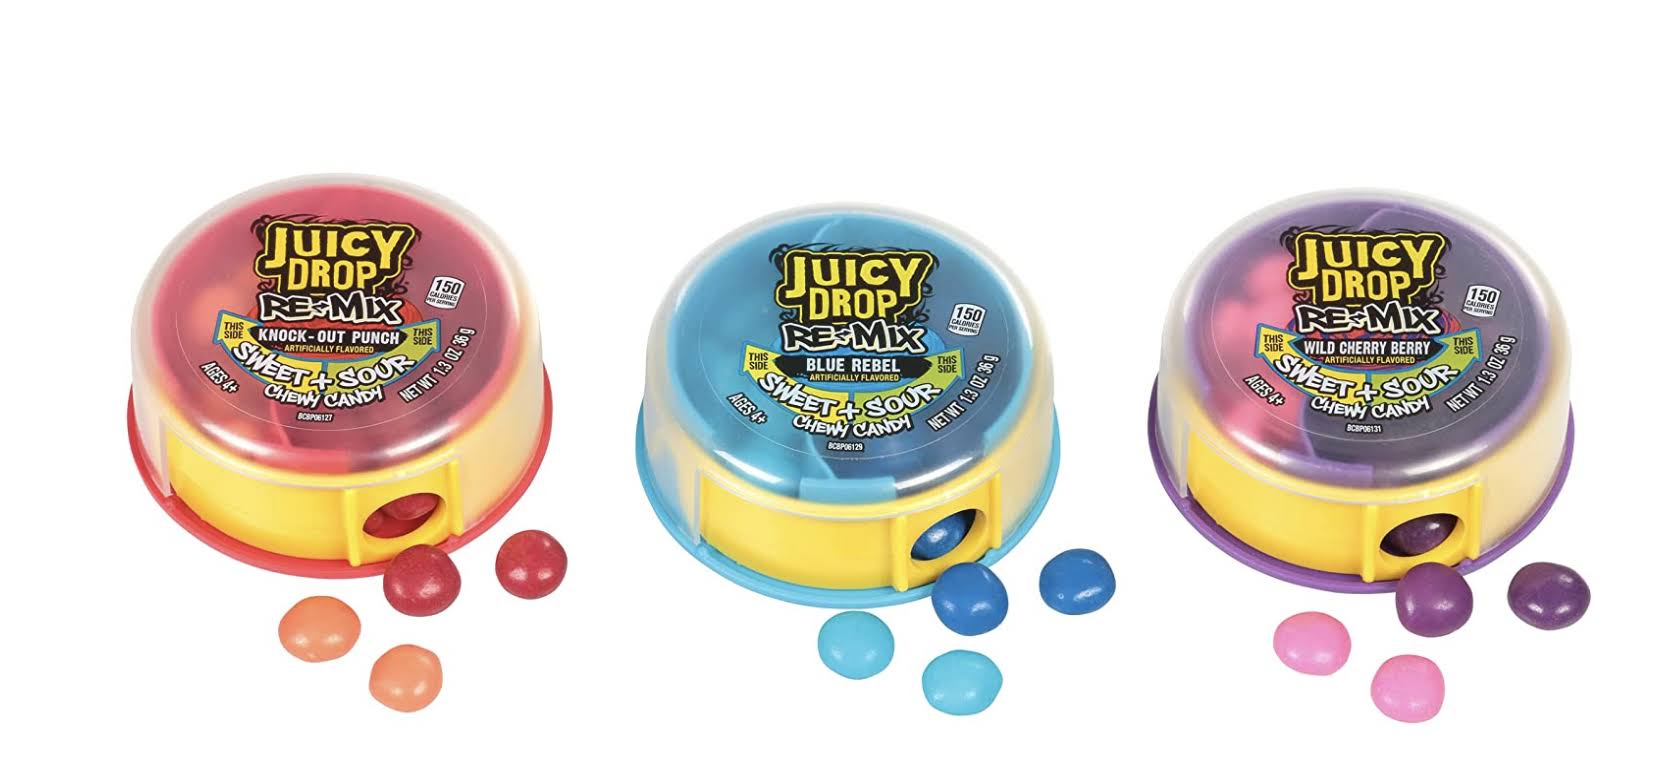 Juicy Drop Re-mix Chewy Candy, Sweet + Sour, Wild Cherry Berry - 1.3 oz